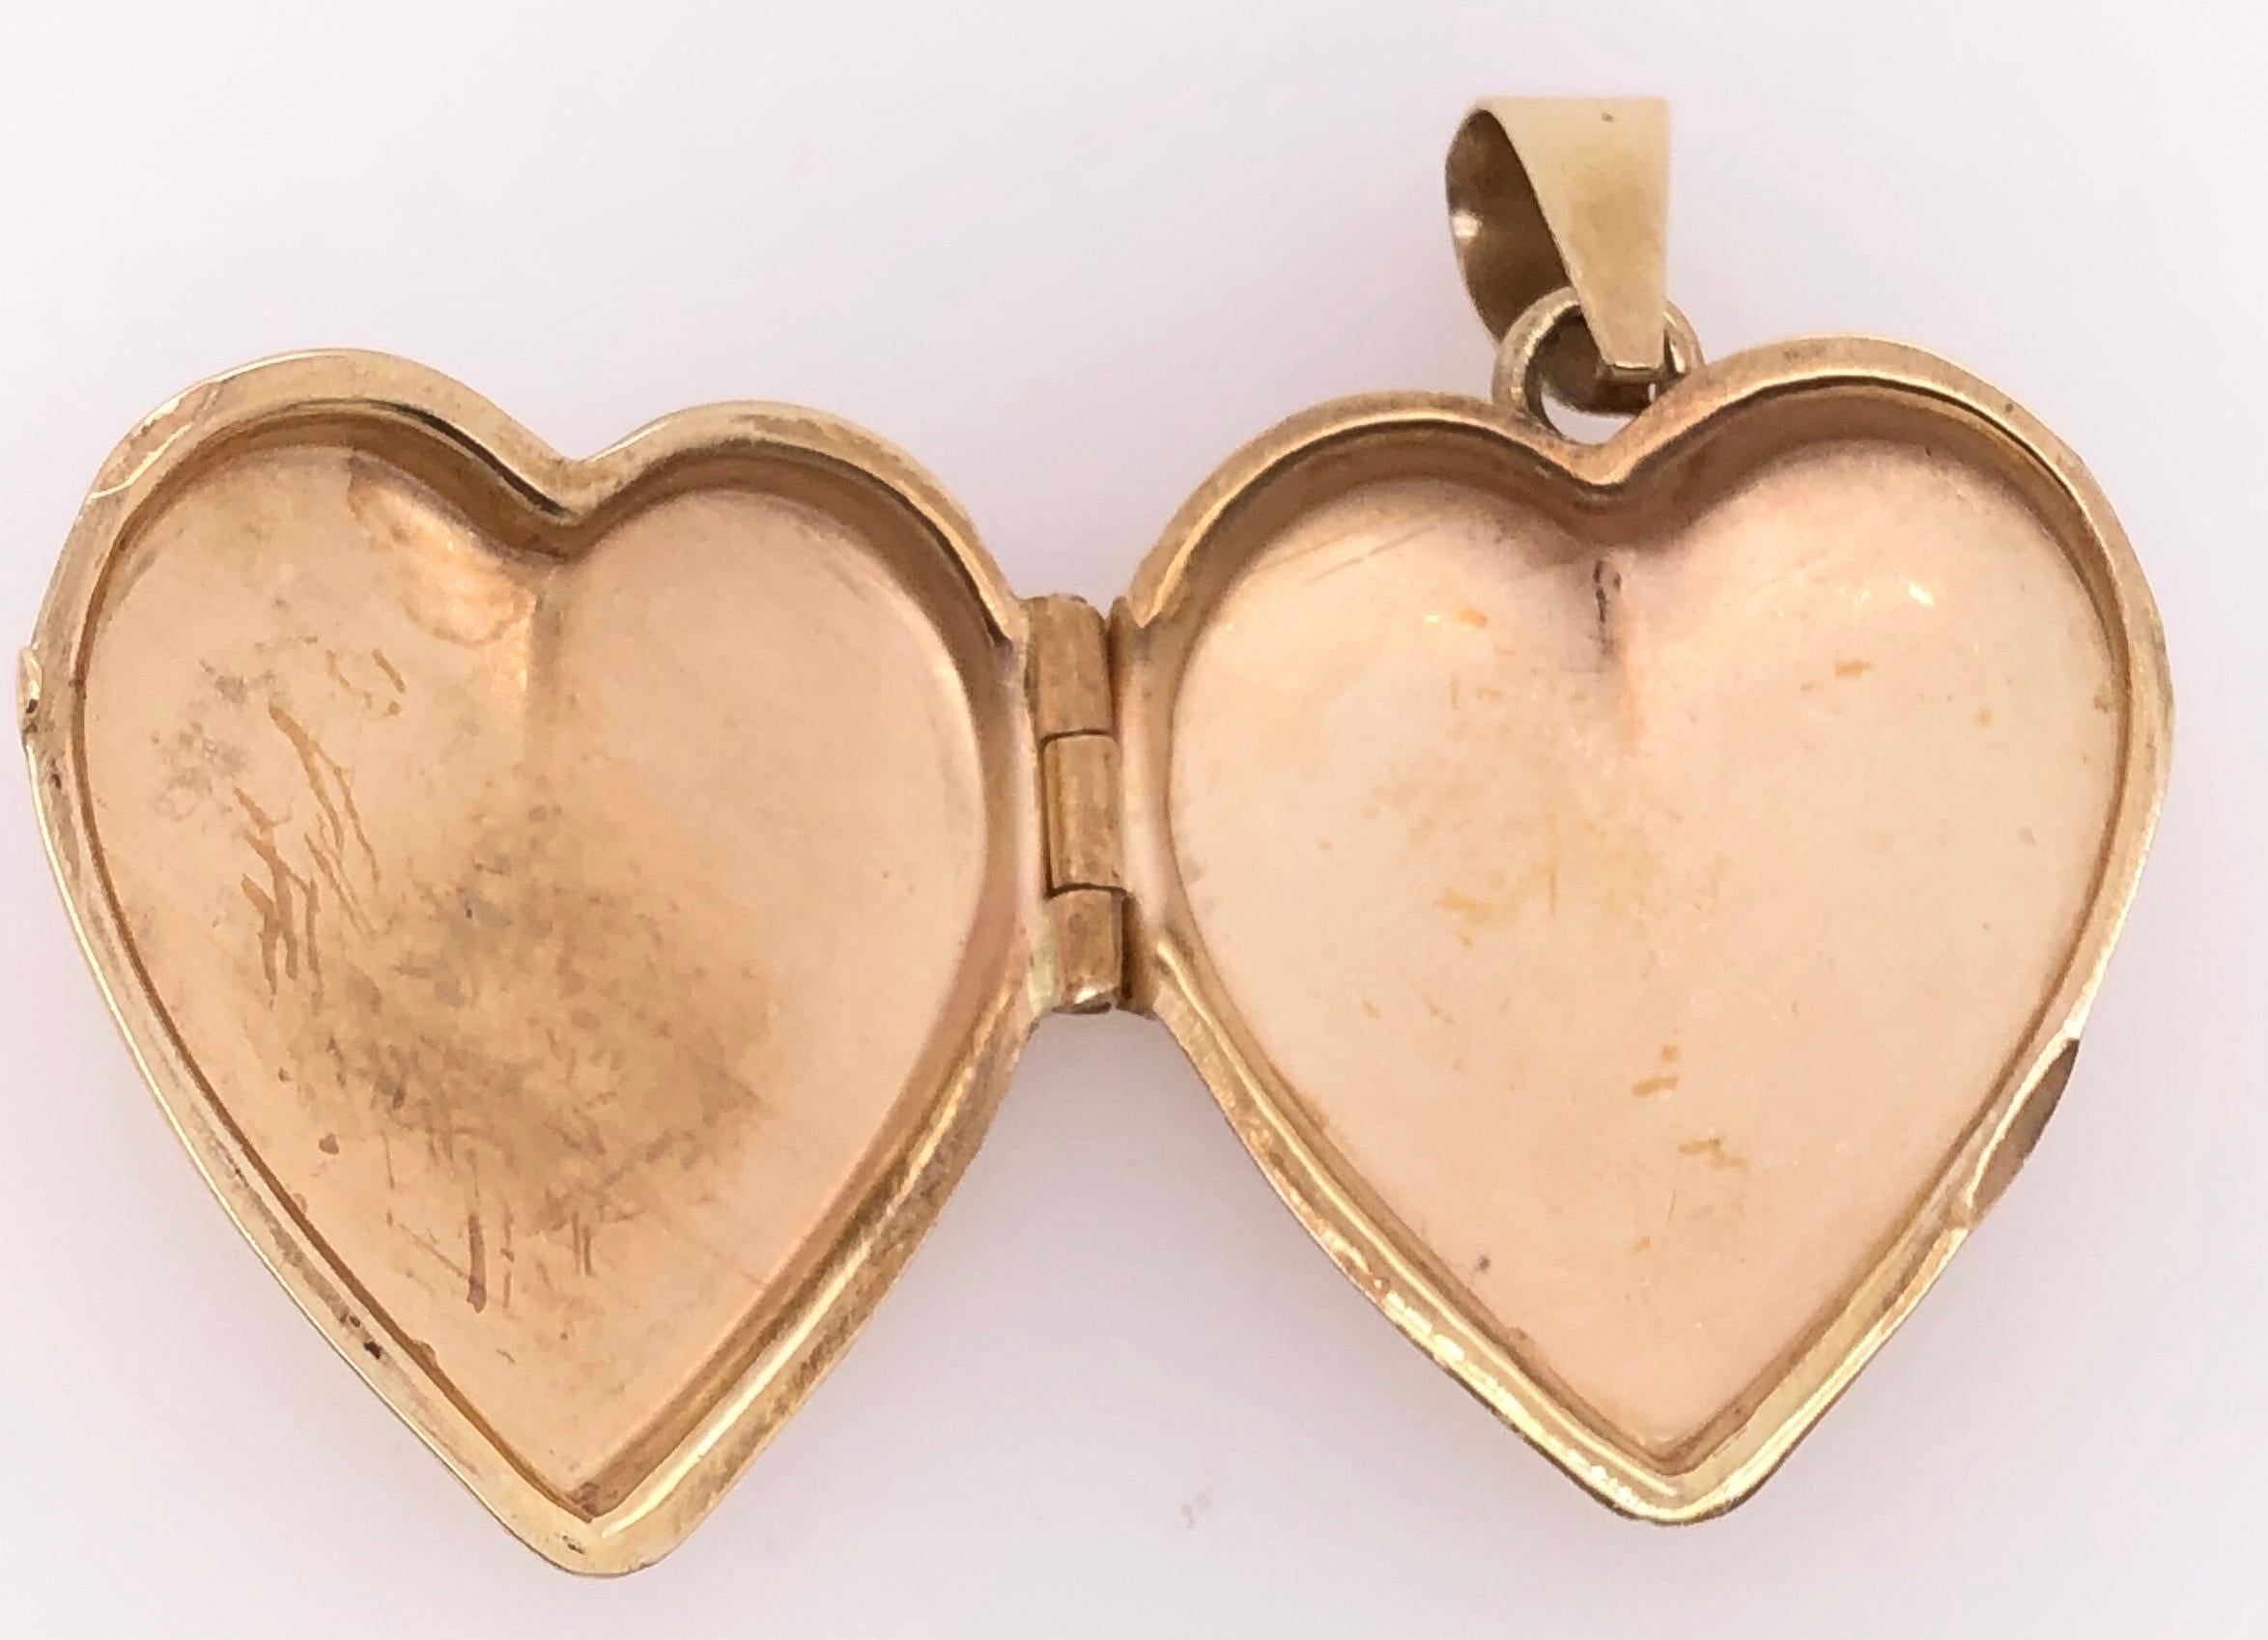 14 Karat Yellow Gold Contemporary Etched Design Heart Locket Pendant.
5 grams total weight.